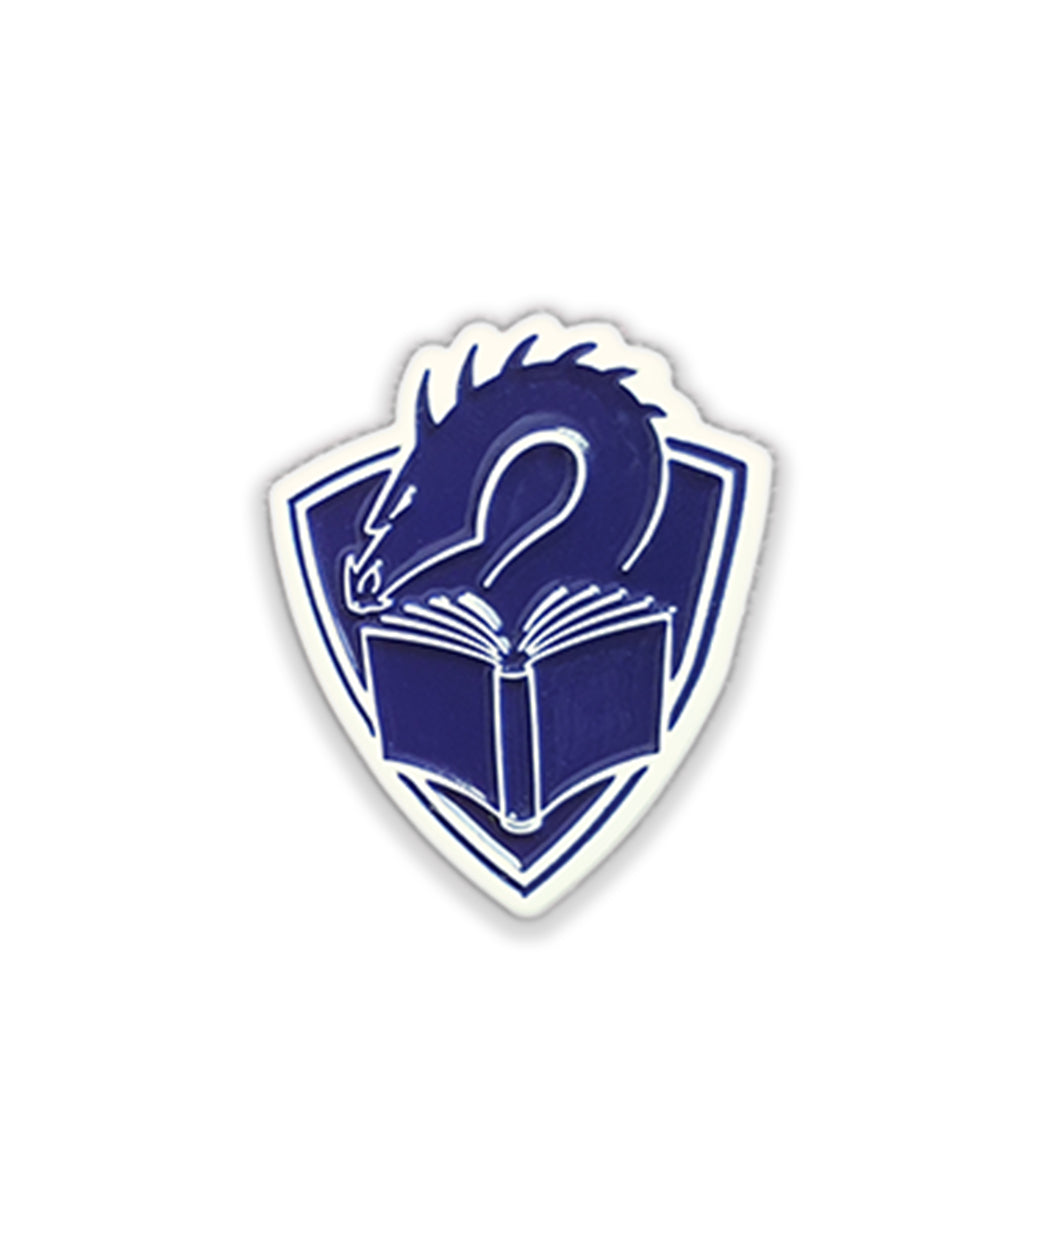 An enamel pin of a dragon's head peering at the pages of an open book, with a crest shape behind them. The crest, dragon, and book are blue, and they are all outlined in white.